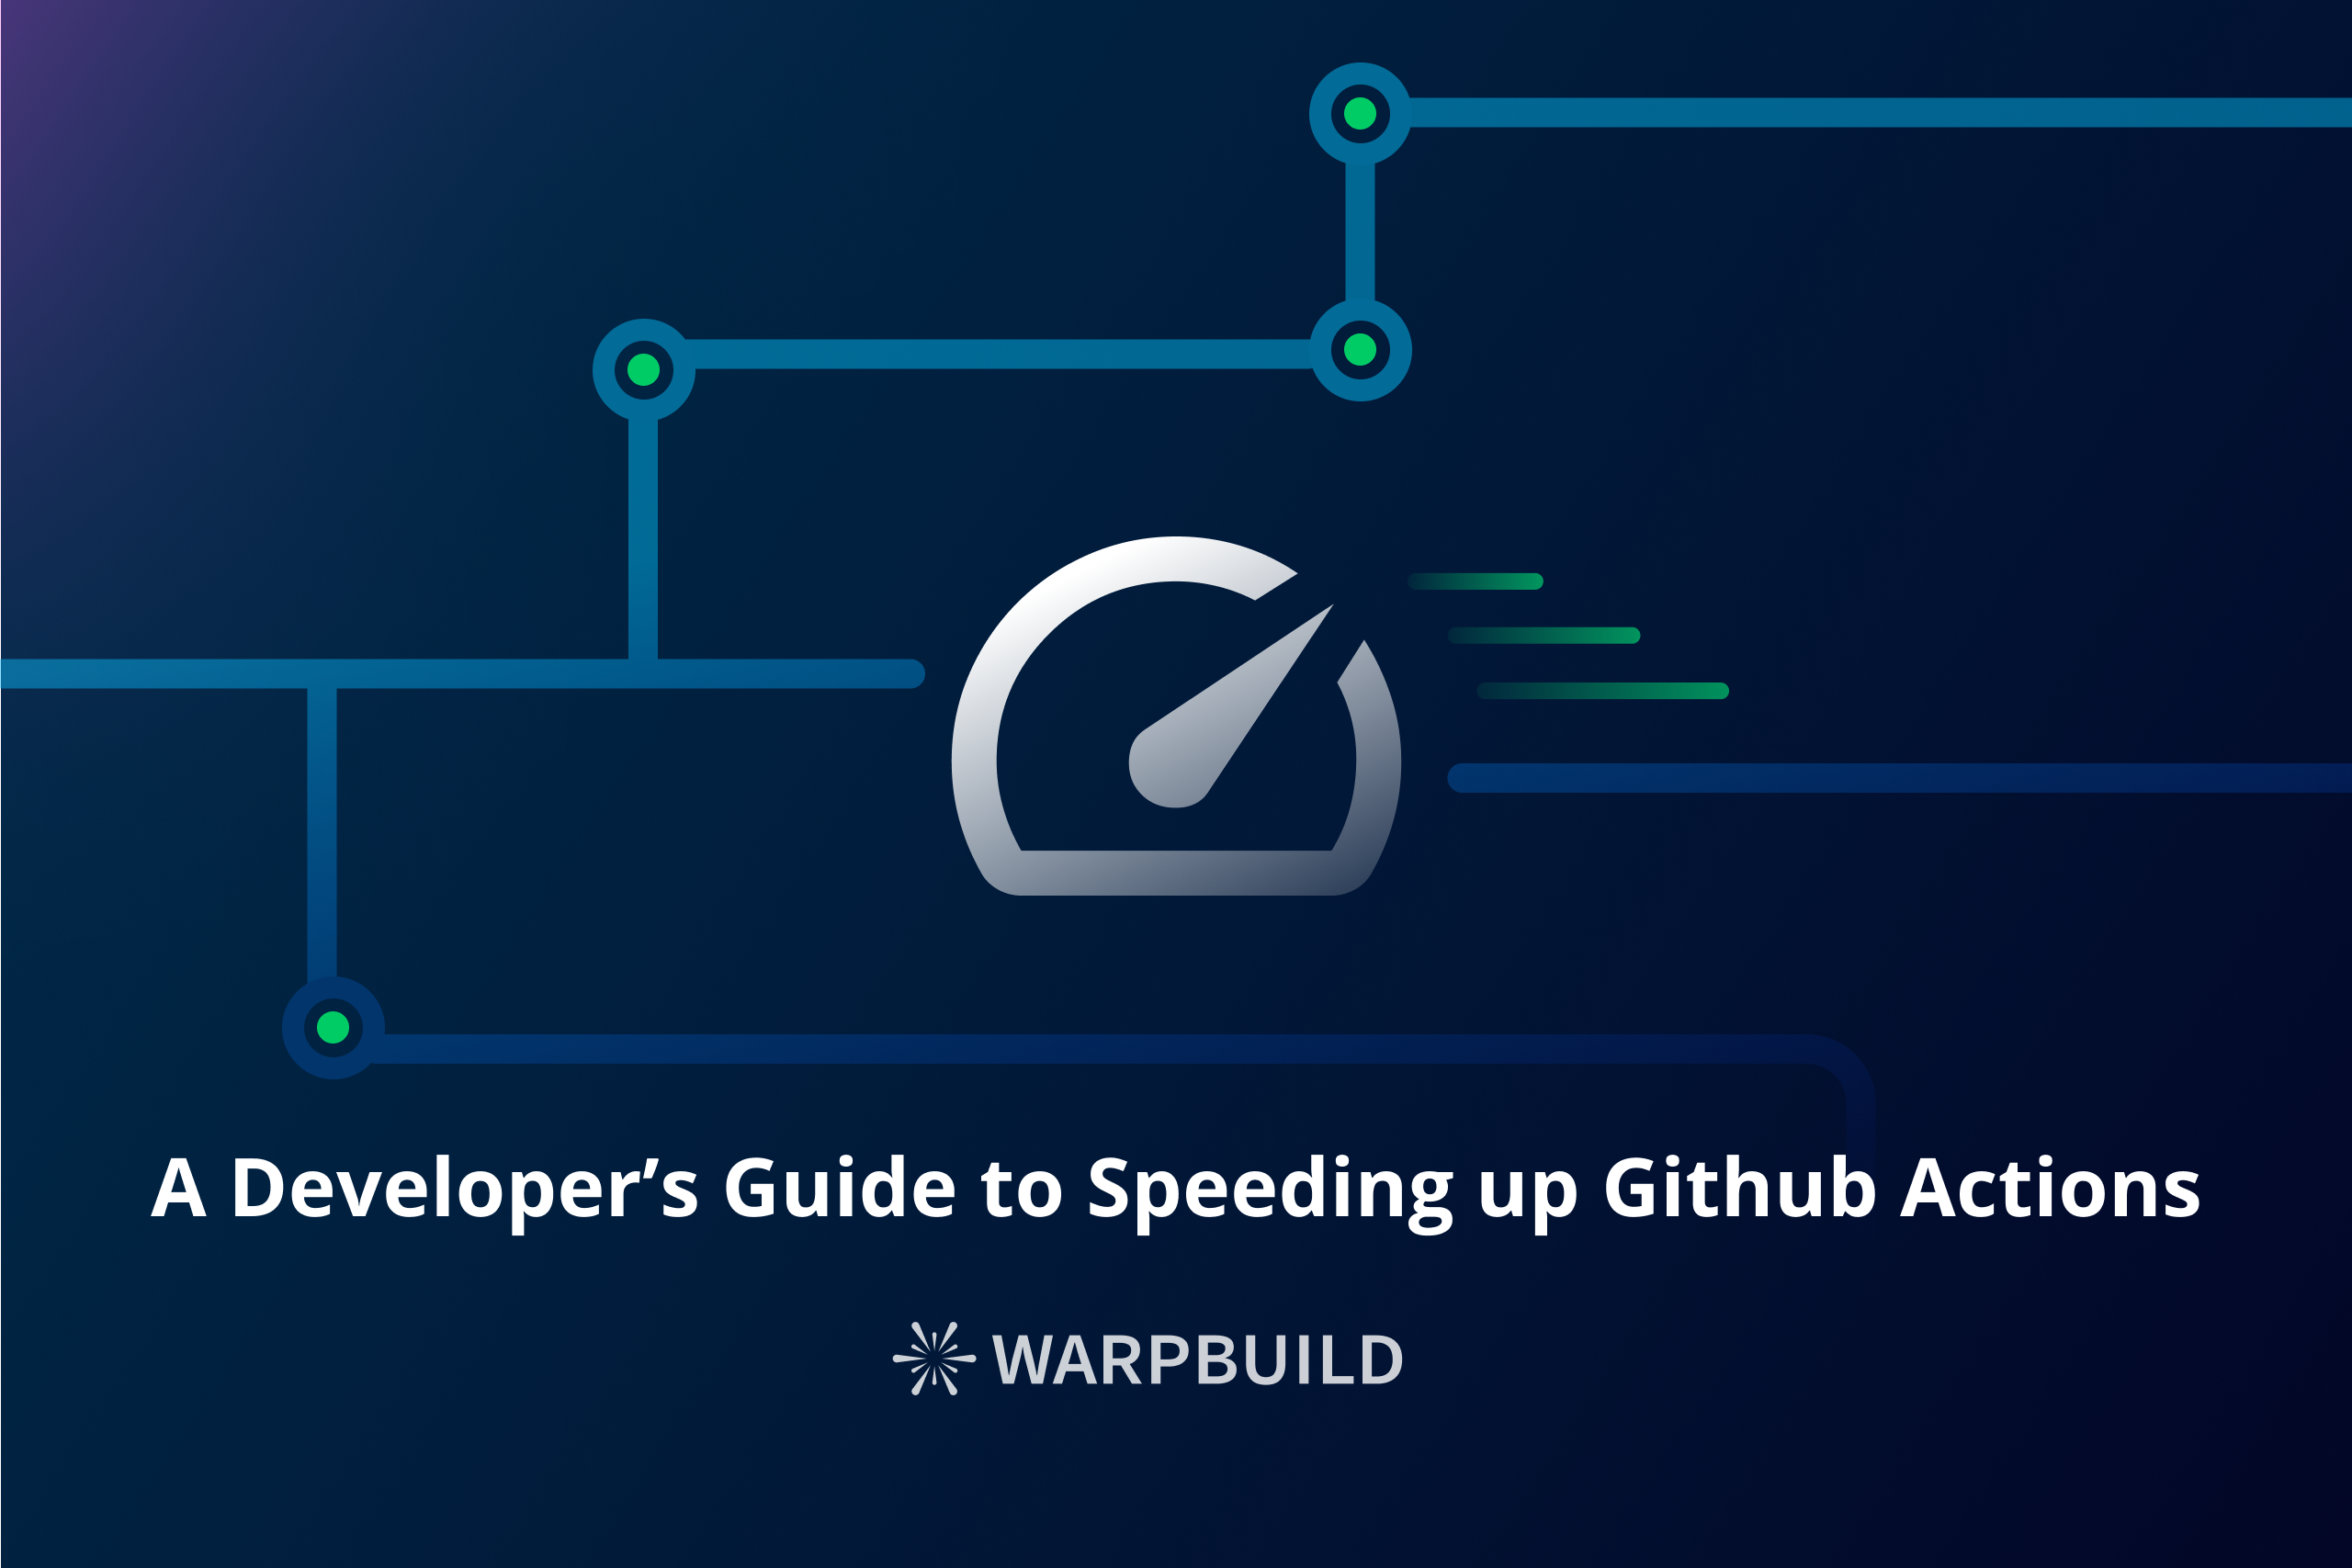 A Developer's Guide to Speeding Up GitHub Actions